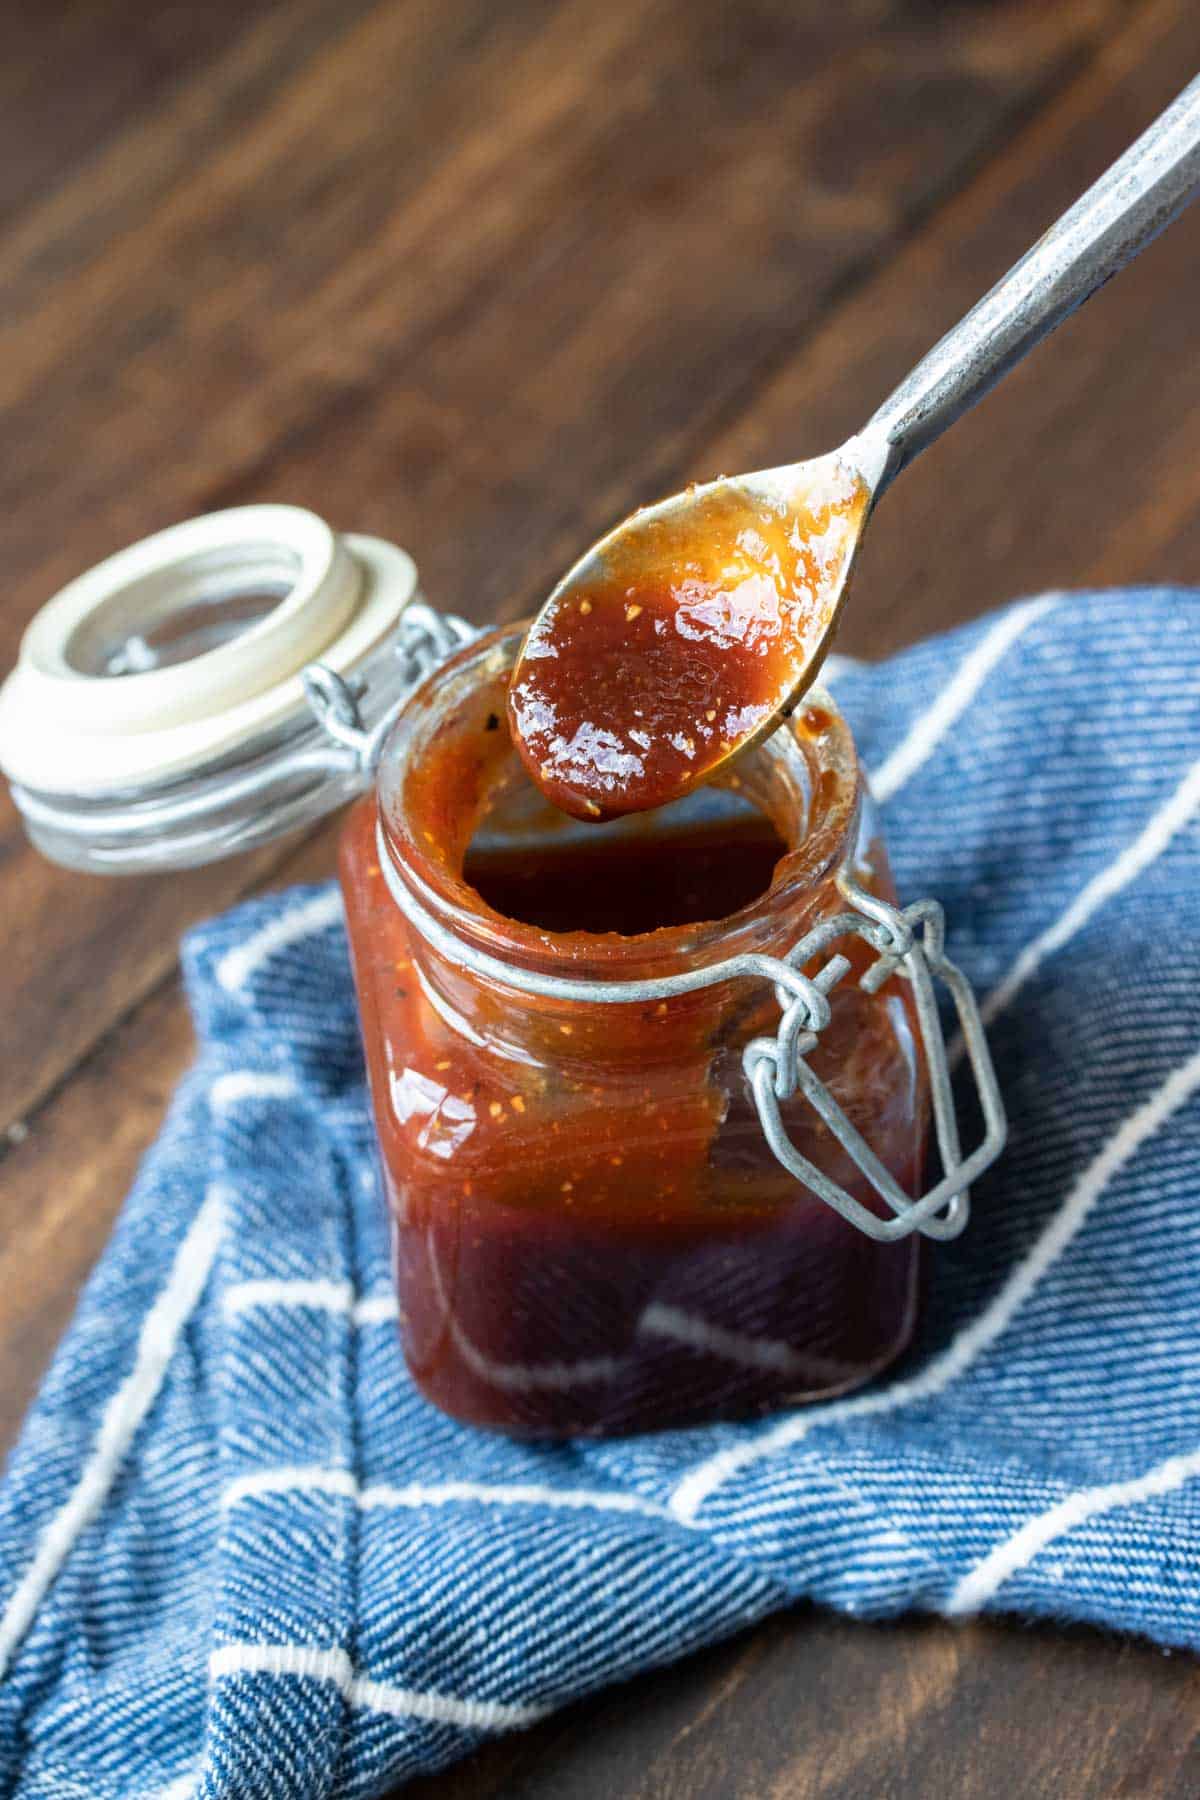 A spoon getting a scoop of steak sauce from a glass jar.